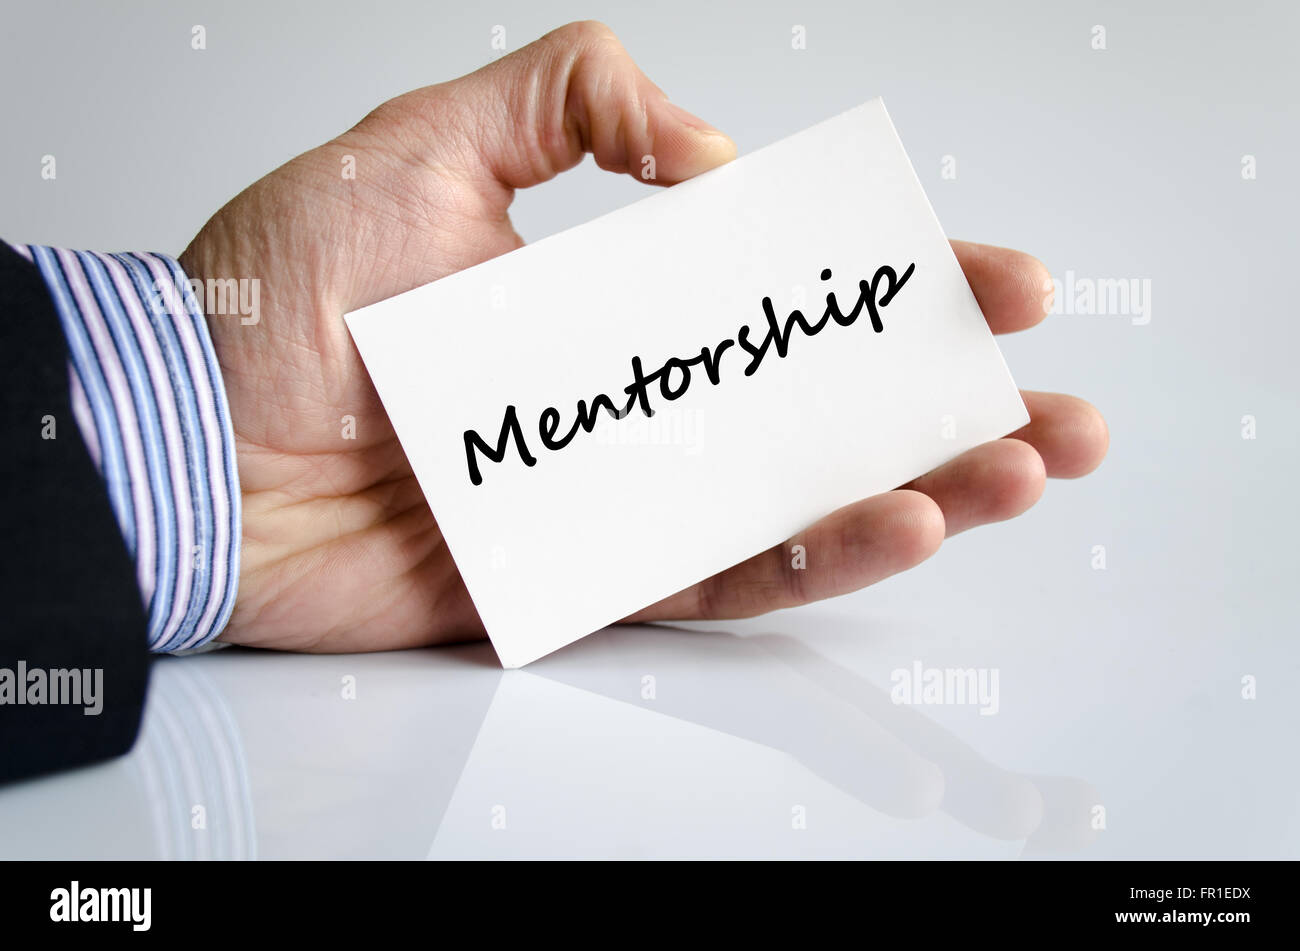 Mentorship text concept isolated over white background Stock Photo